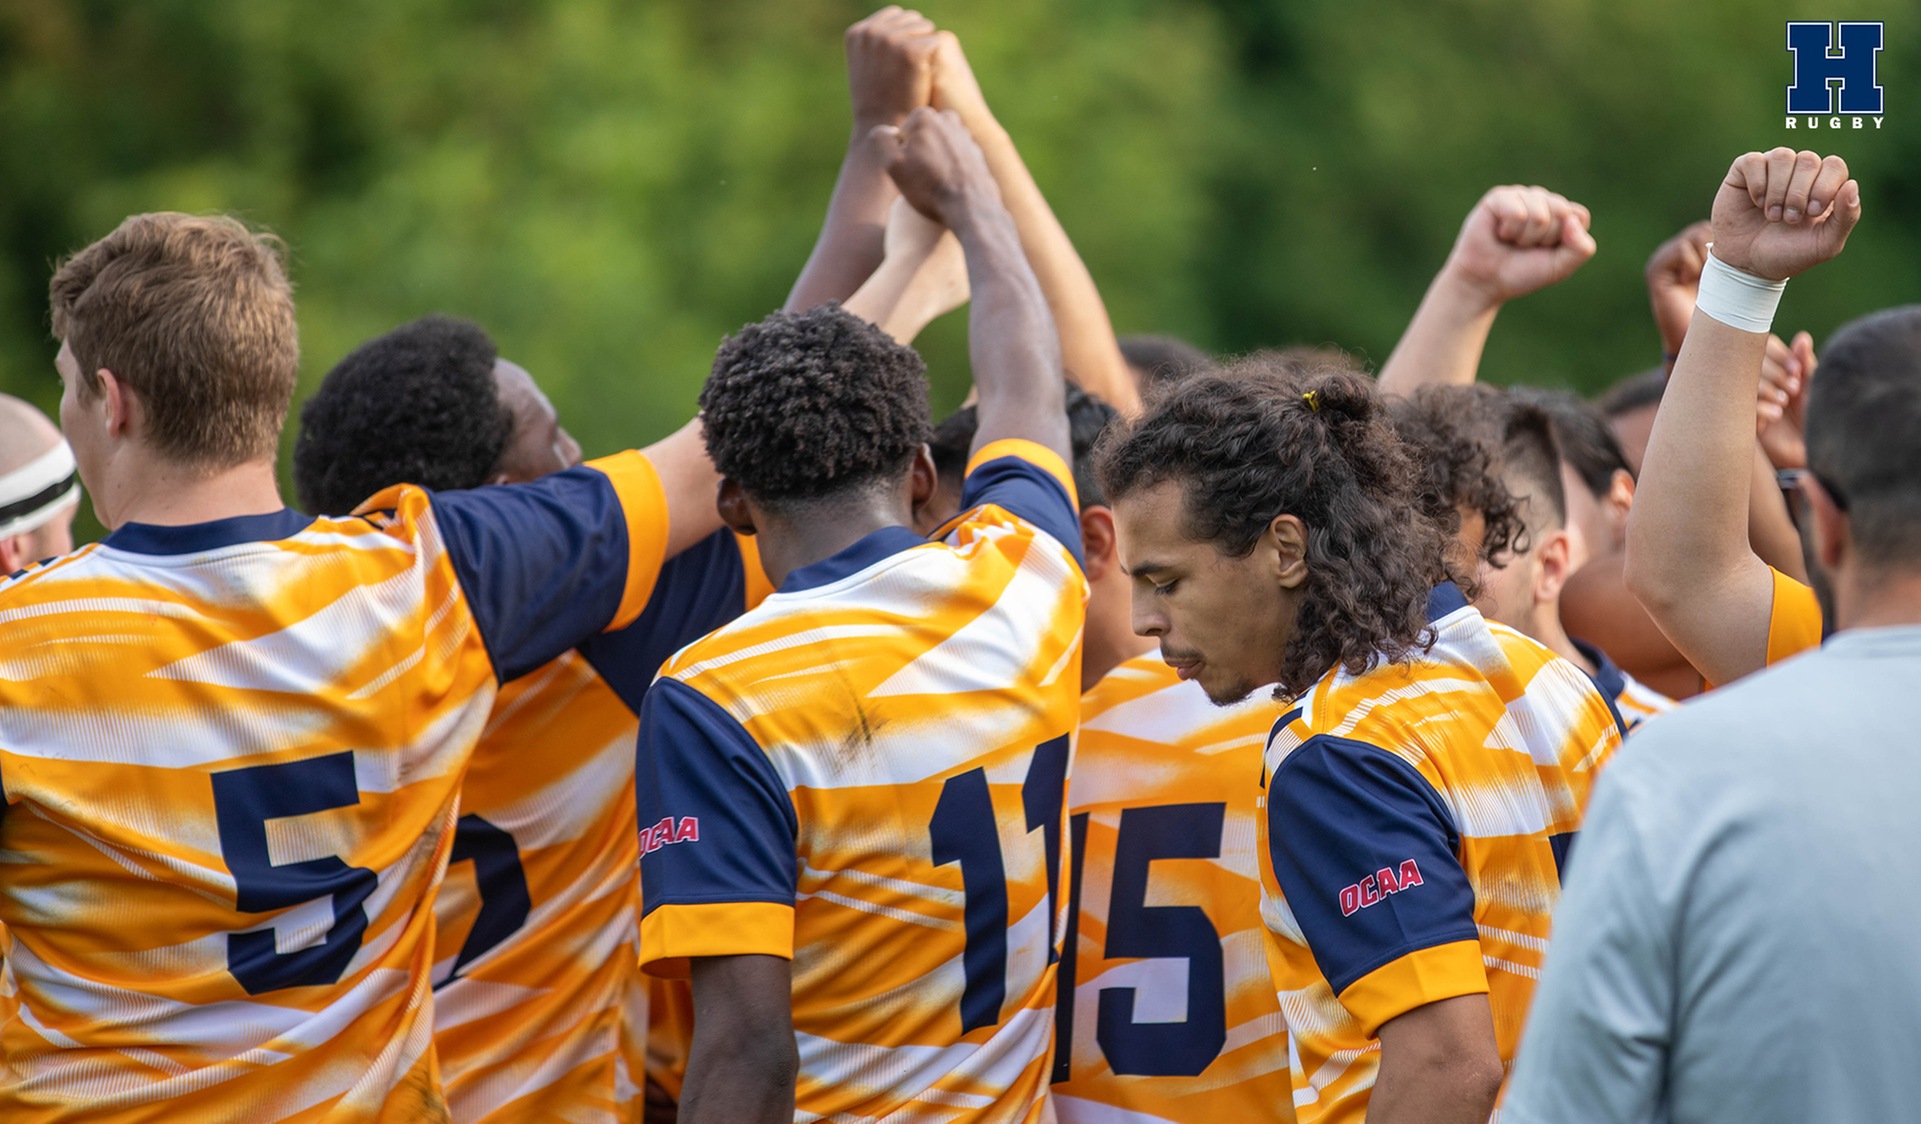 Humber Rugby Announces Open Tryouts for Rugby 7's Squad